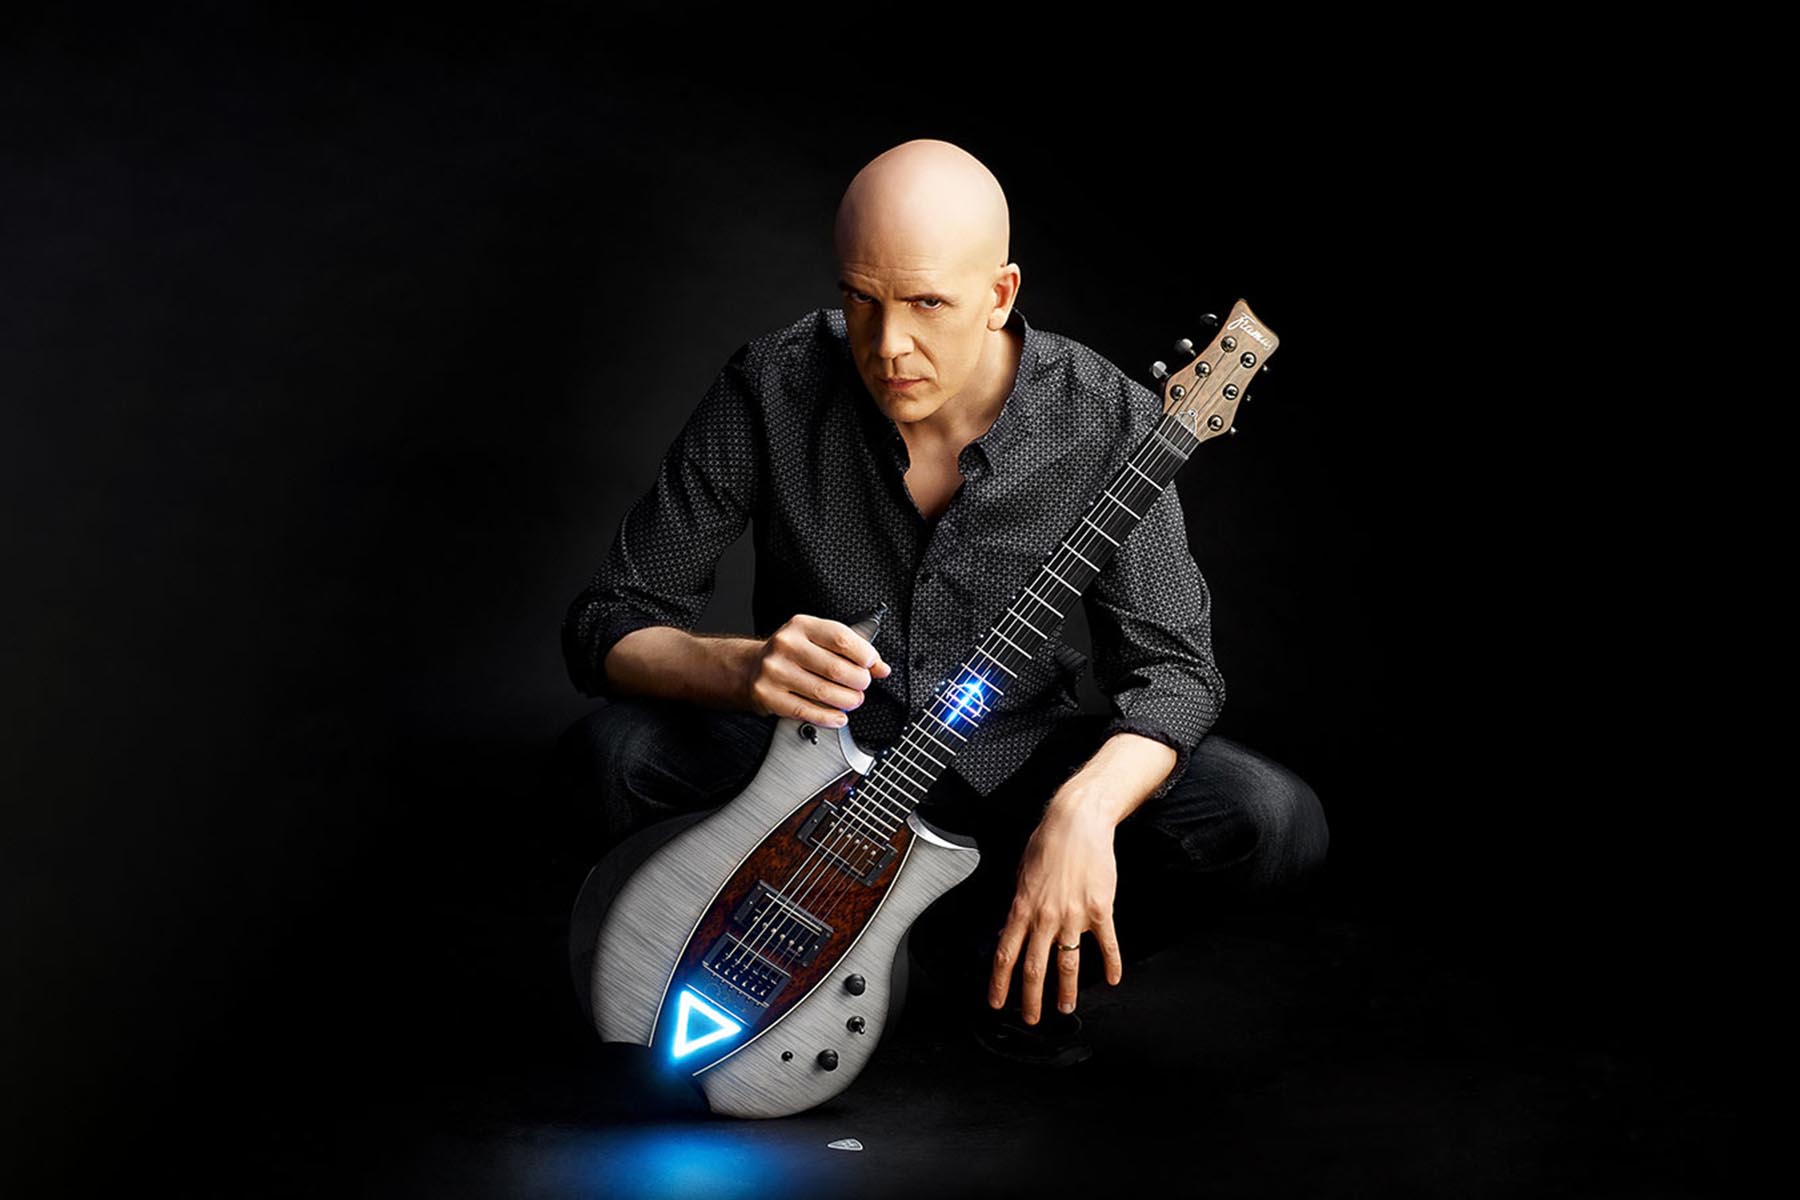 DEVIN TOWNSEND to Release "Order Of Magnitude – Empath Live 1" As First Volume Documenting the EMPATH Touring Cycle